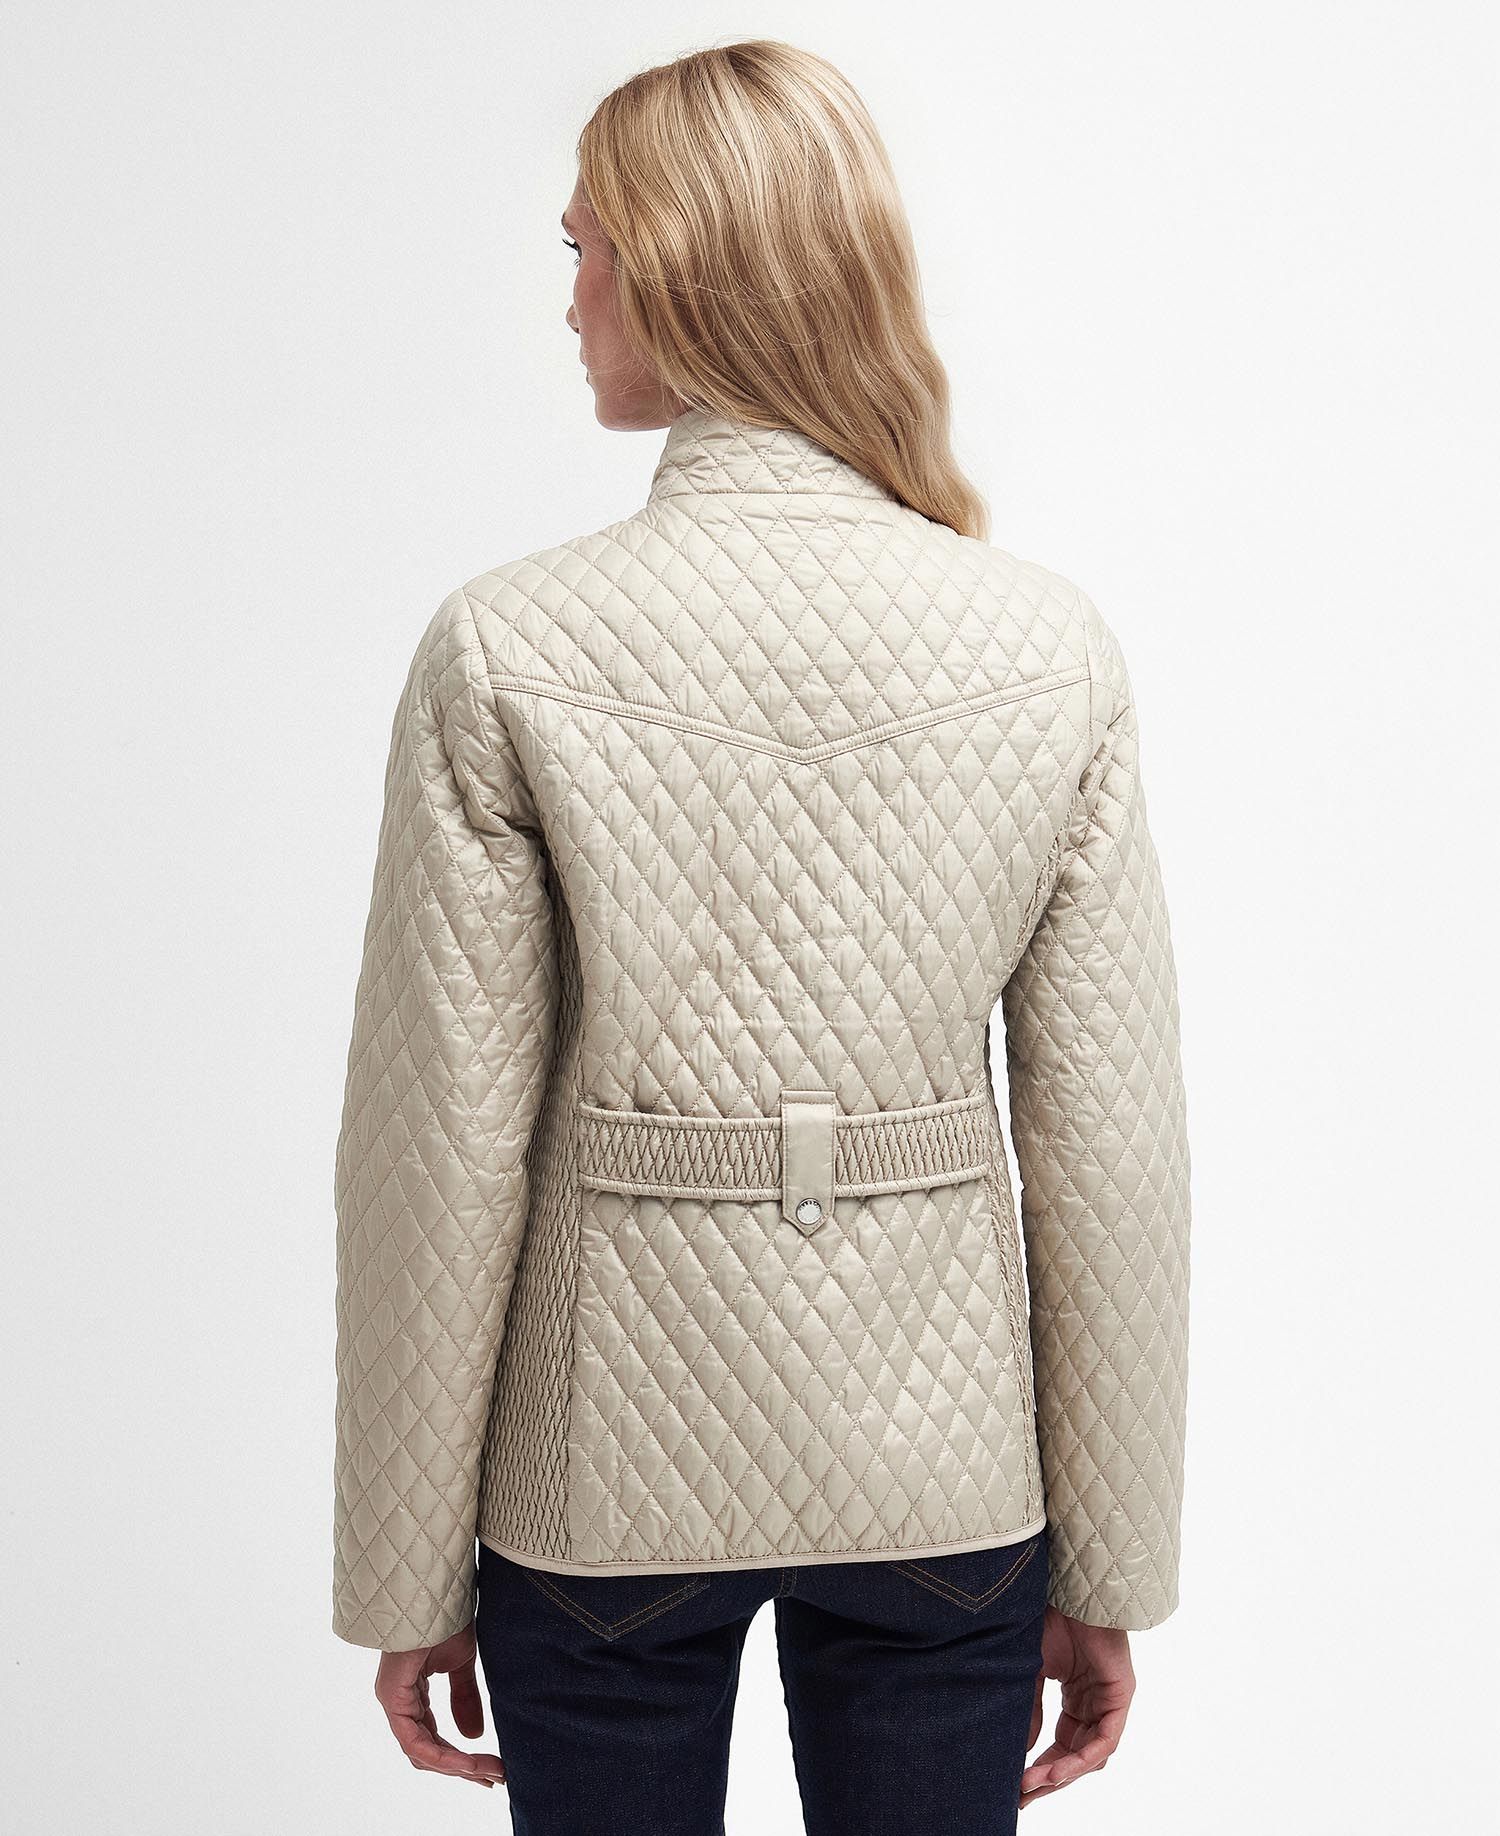 Barbour Swallow Quilted Jacket - Light Sand